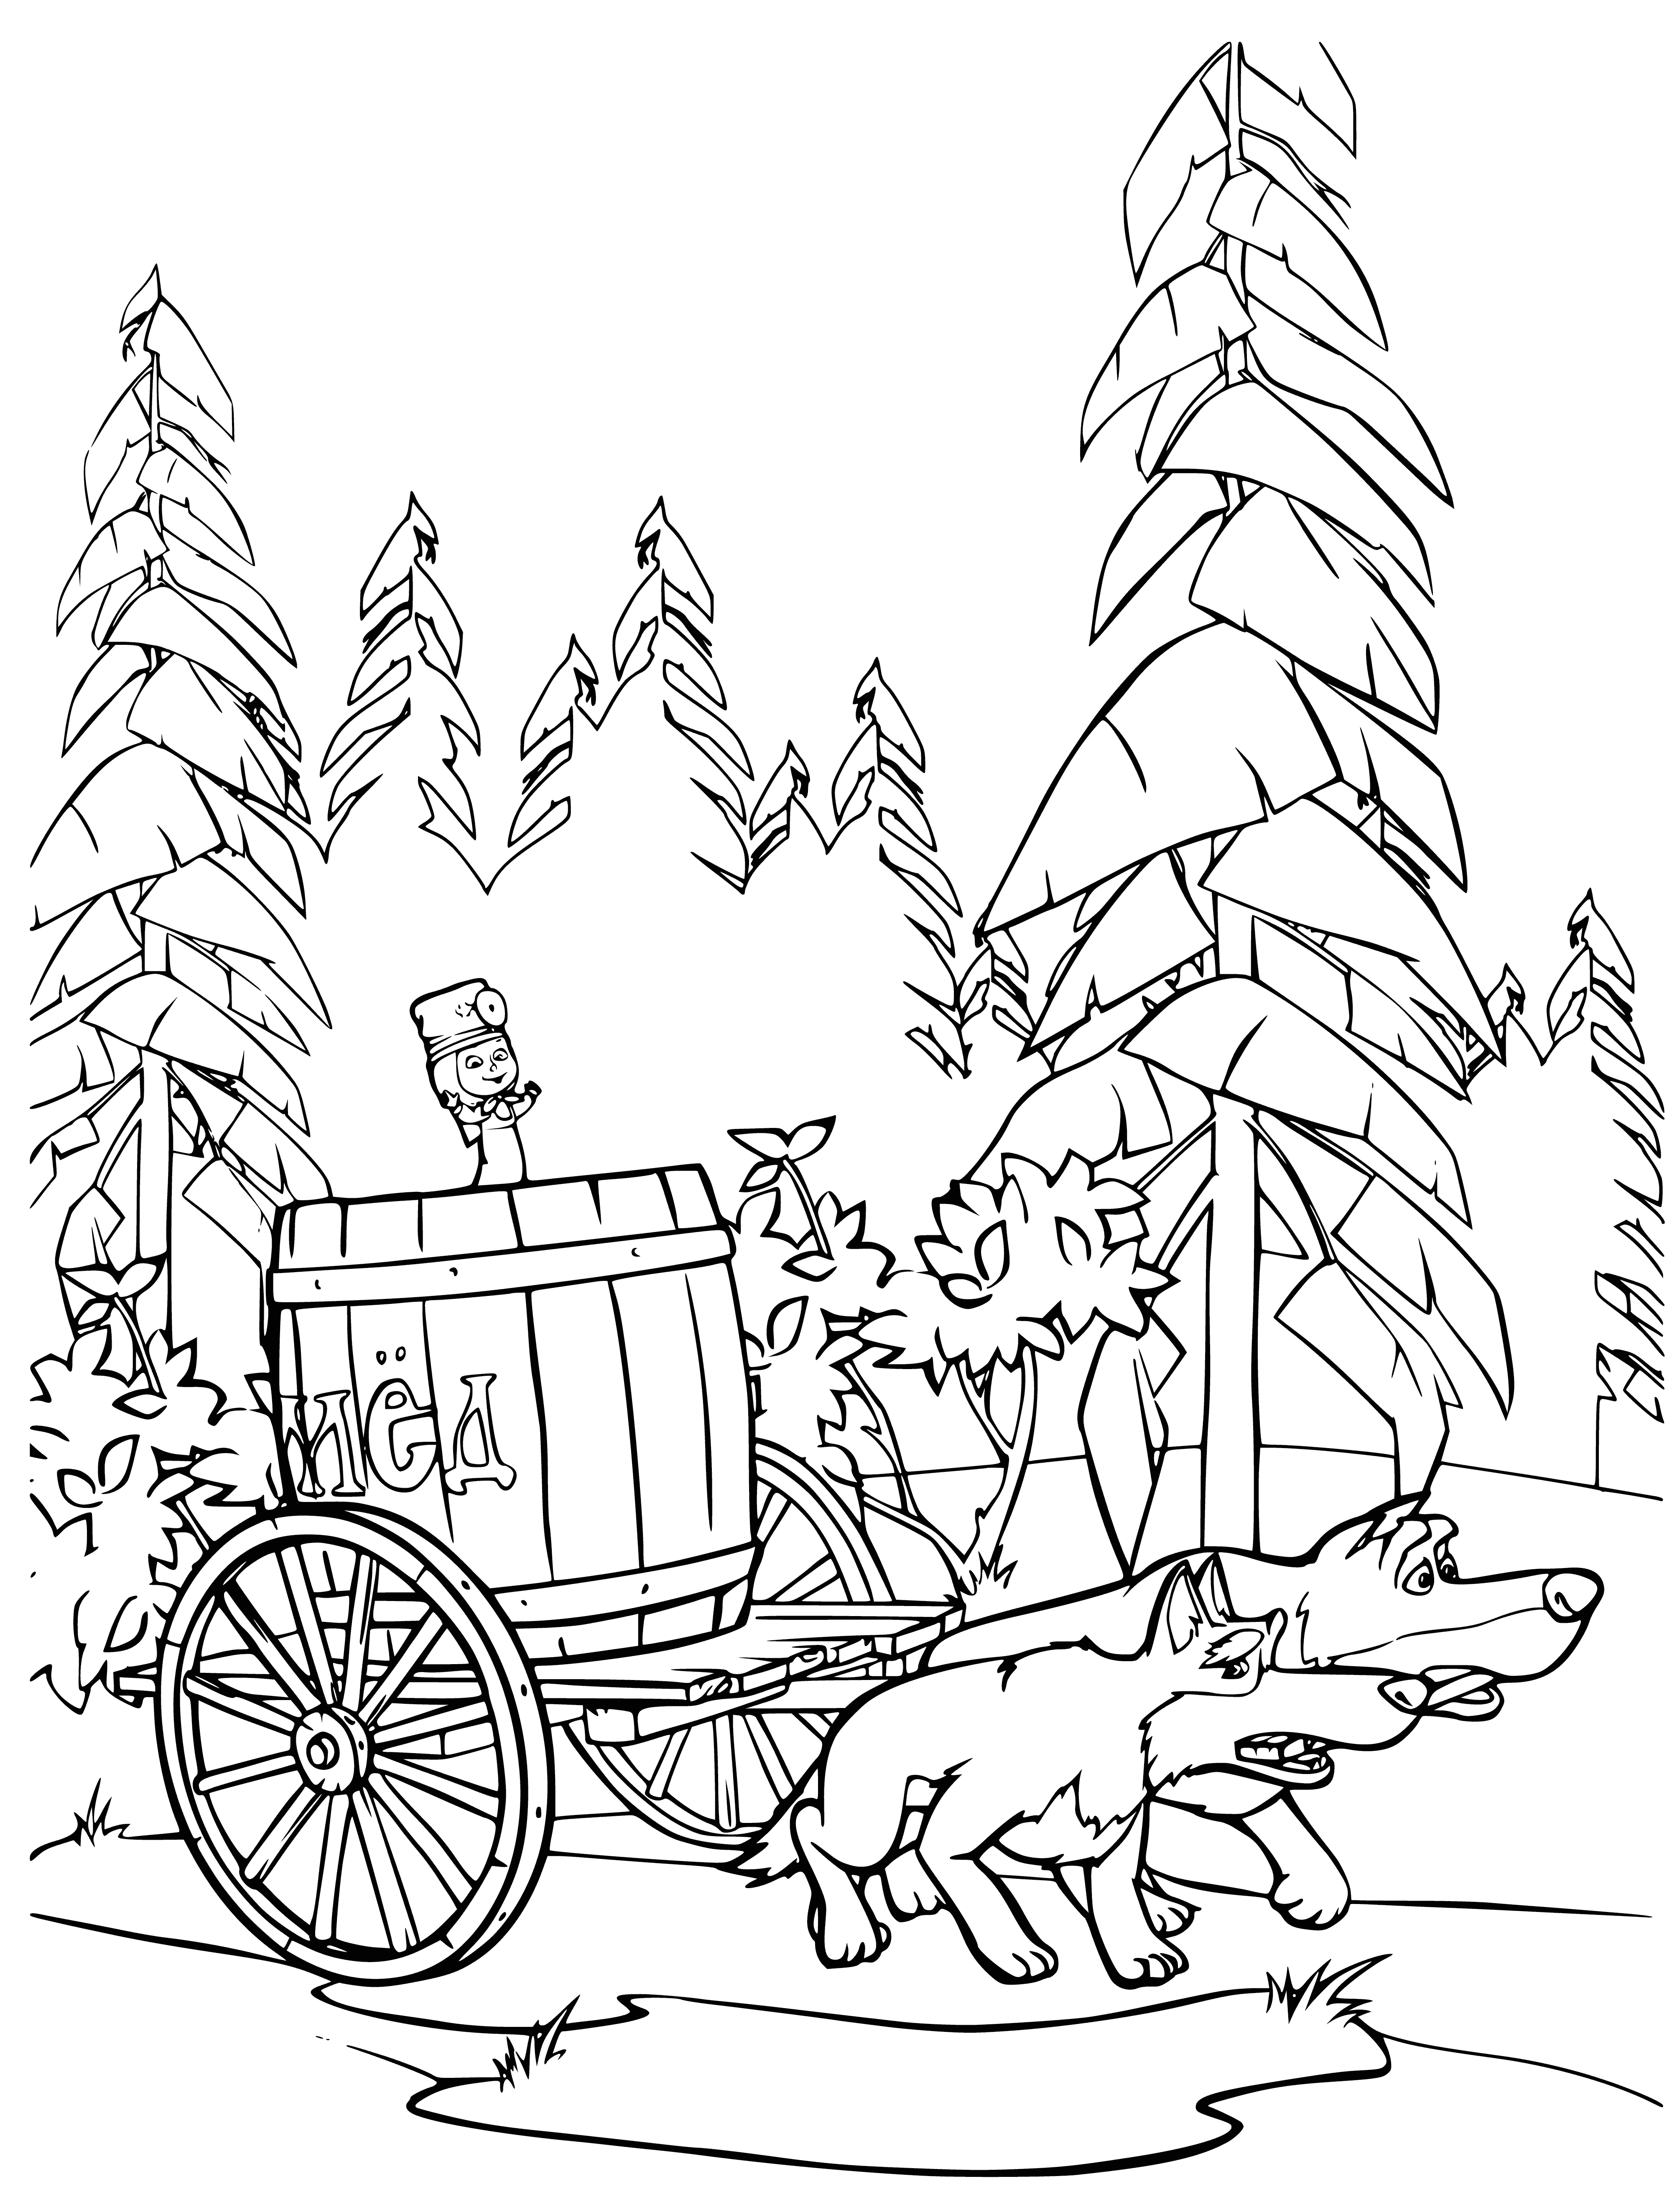 coloring page: Masha crawls with honey, ready to give a spoonful to a bear—smiling joyfully!